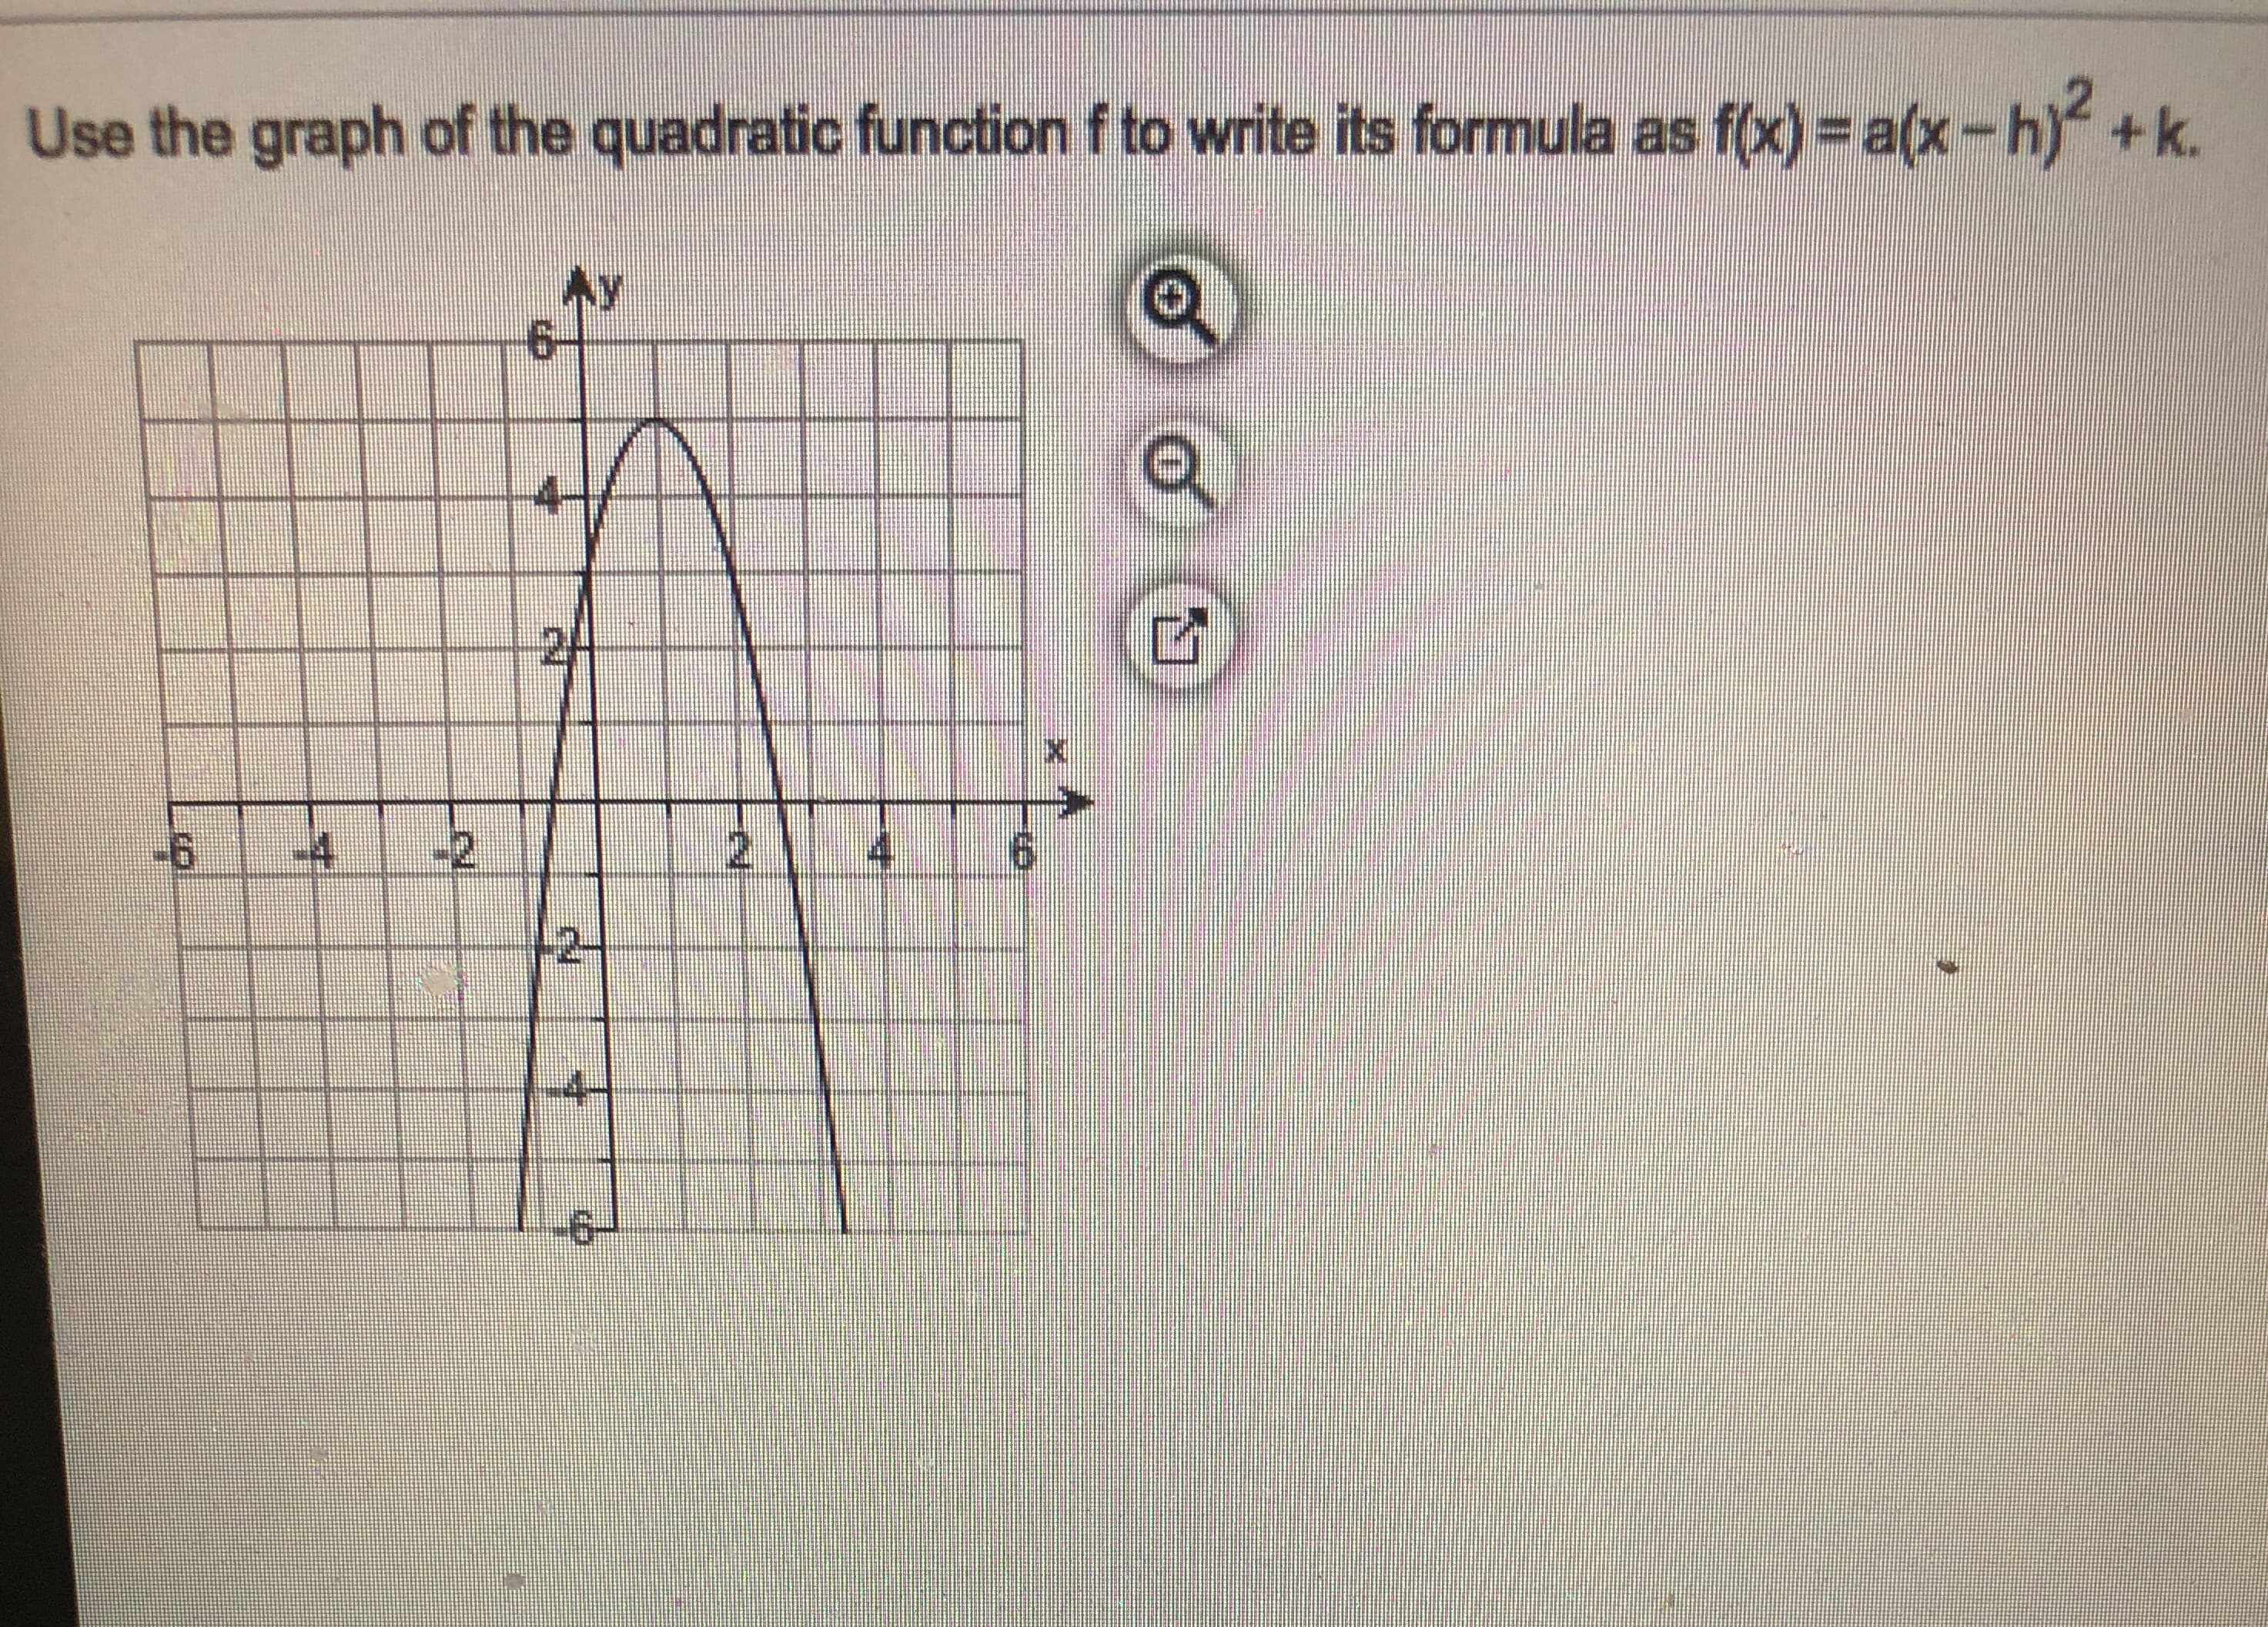 Use the graph of the quadratic function f to write its formula as f(x) =a(x-h) +k.
Ay
-6
-4
-2
2.
4.
9.
-2-
